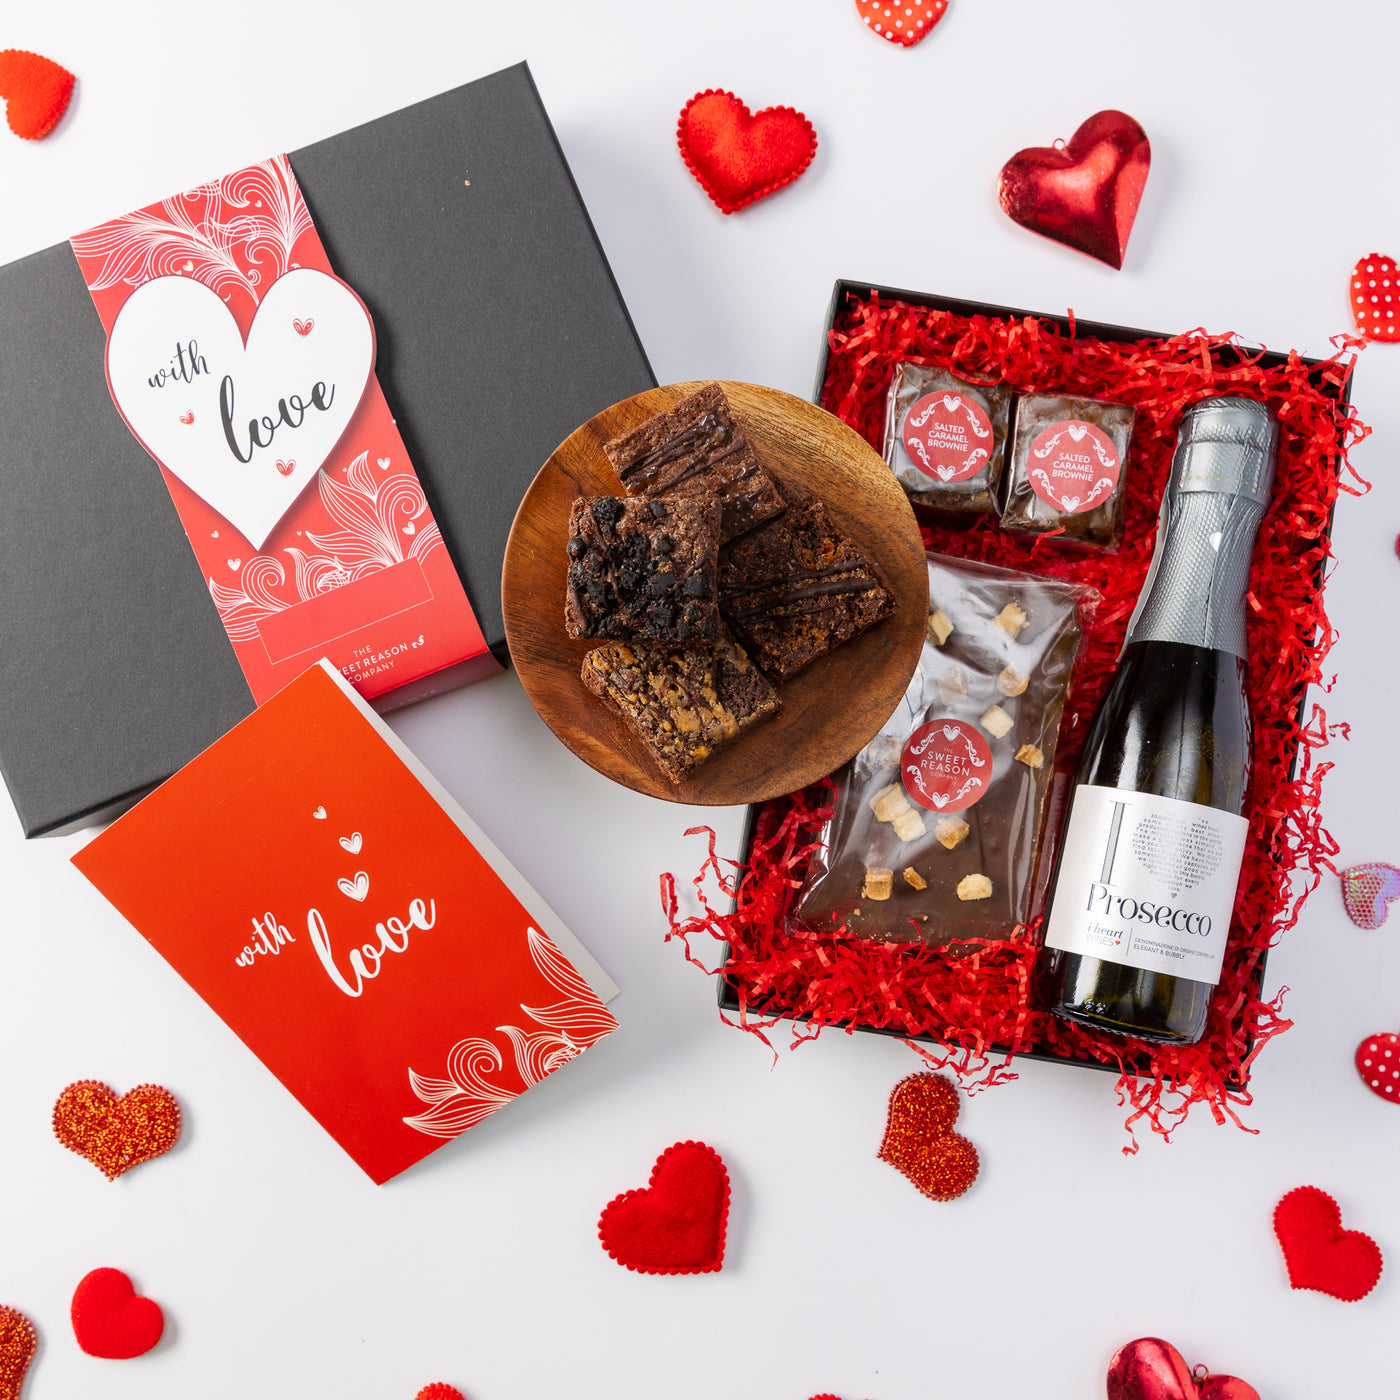 'With Love' Chocolate Slab, Brownies and Prosecco